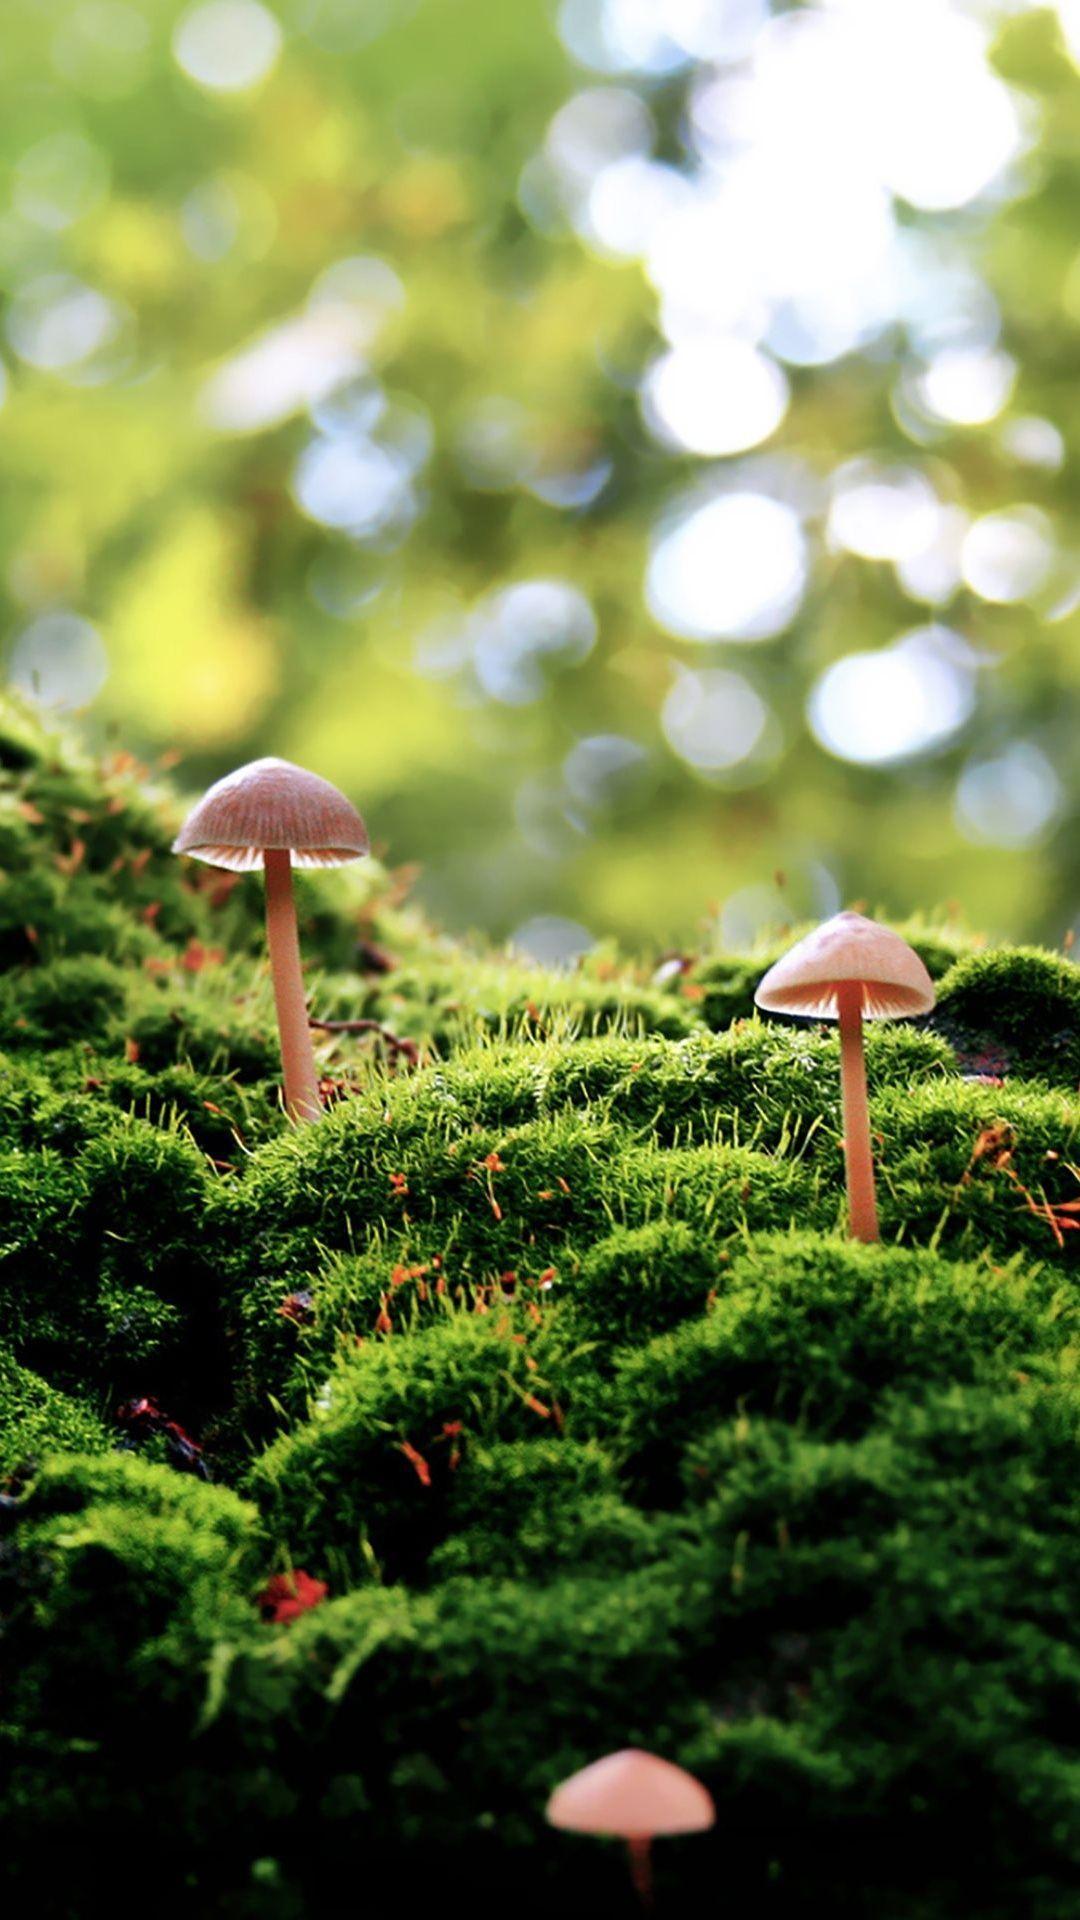 mycology | To The Best Of Our Knowledge